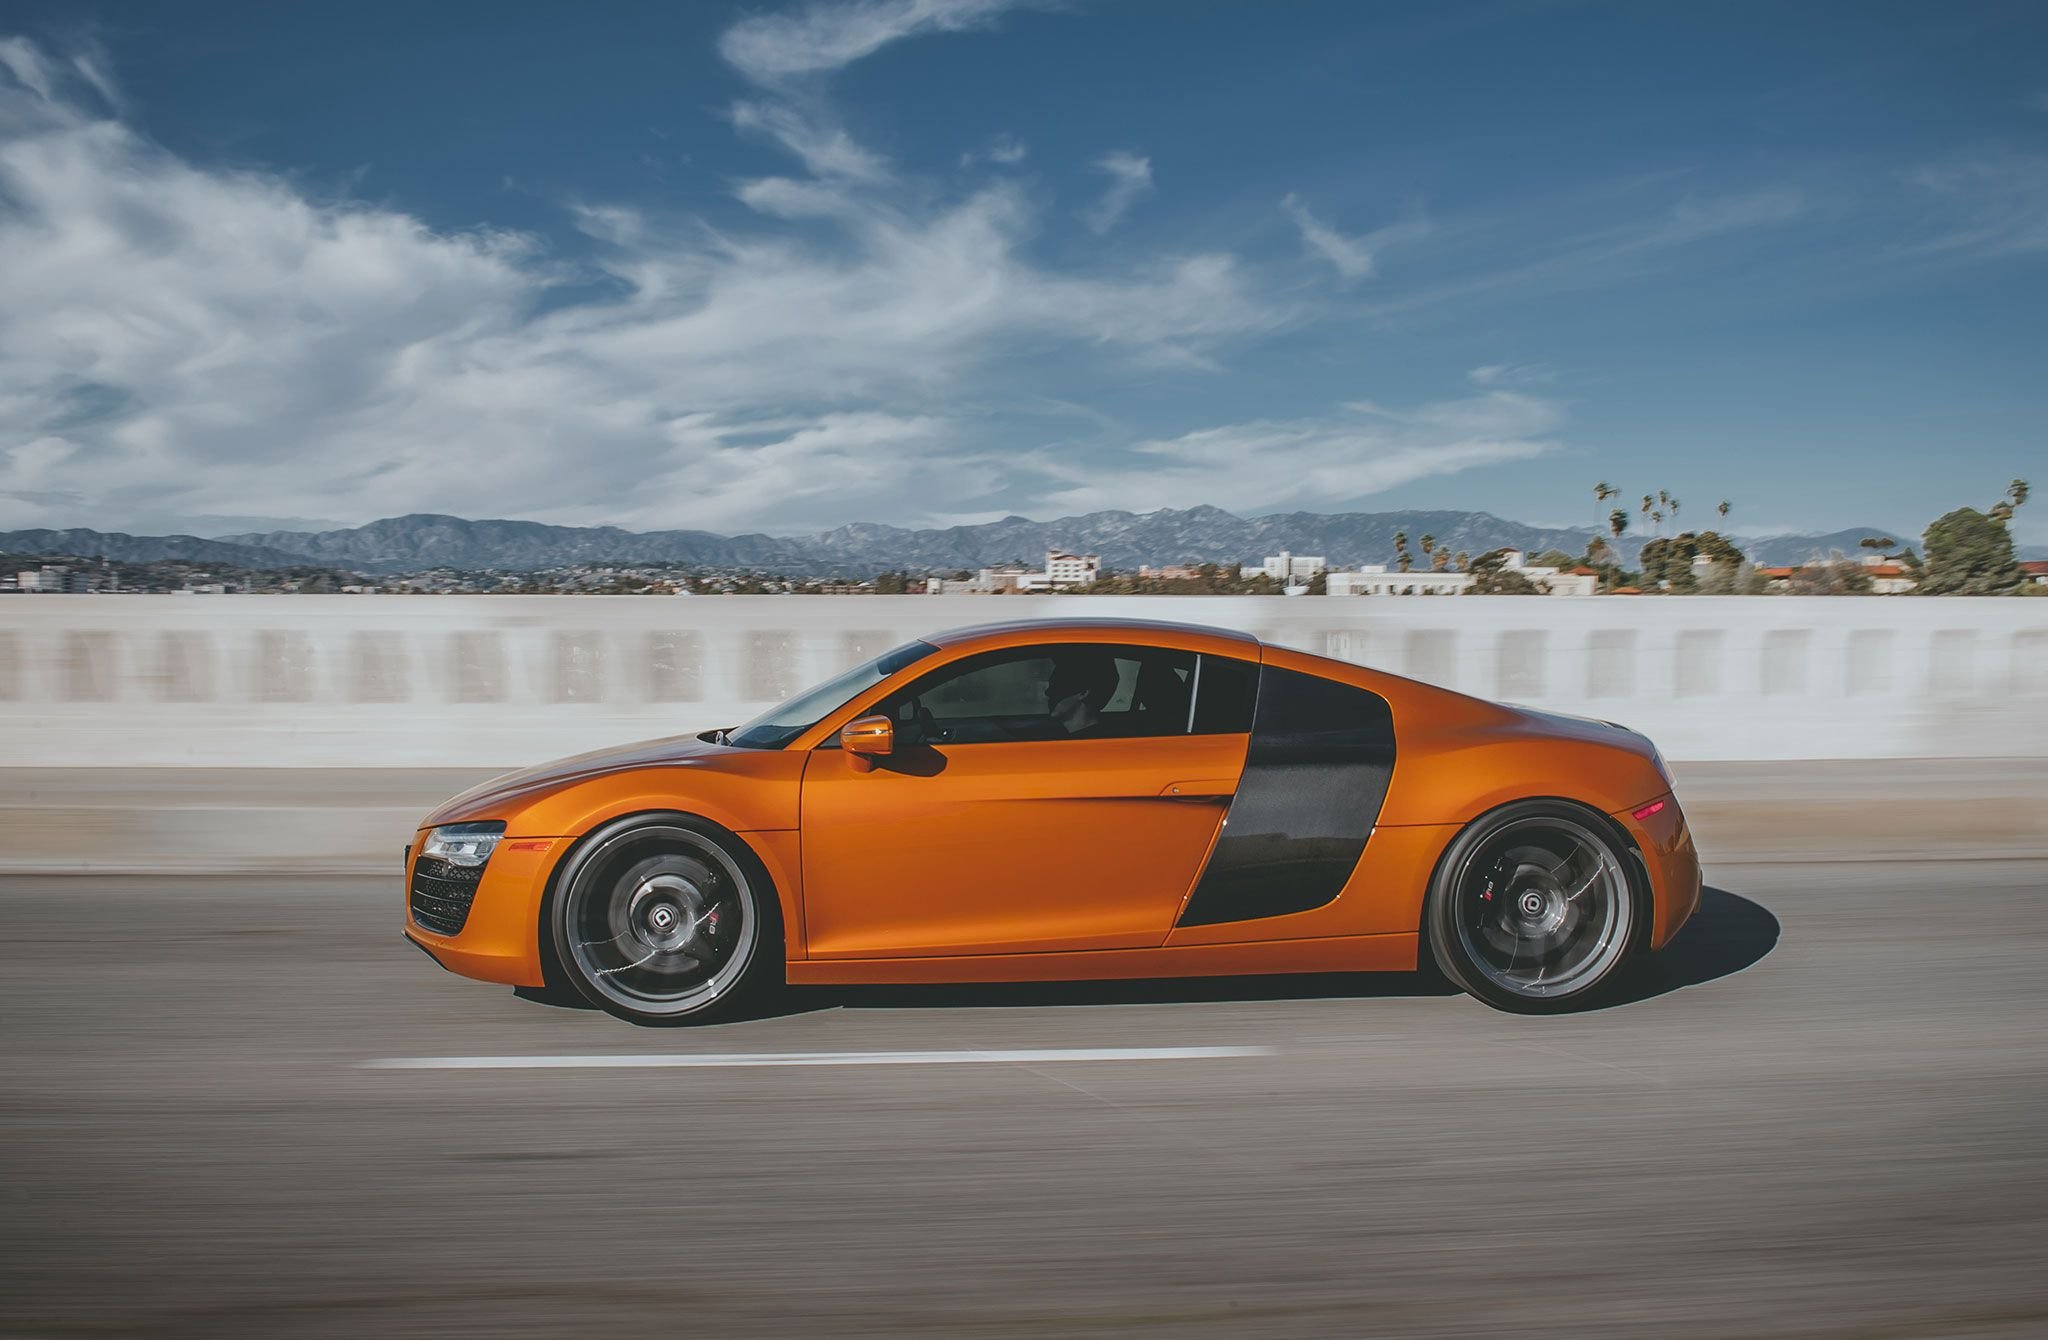 pacific, German, Audi, R8, V8, Supercharger, Coupe, Cars, Supercars, Tuning Wallpaper